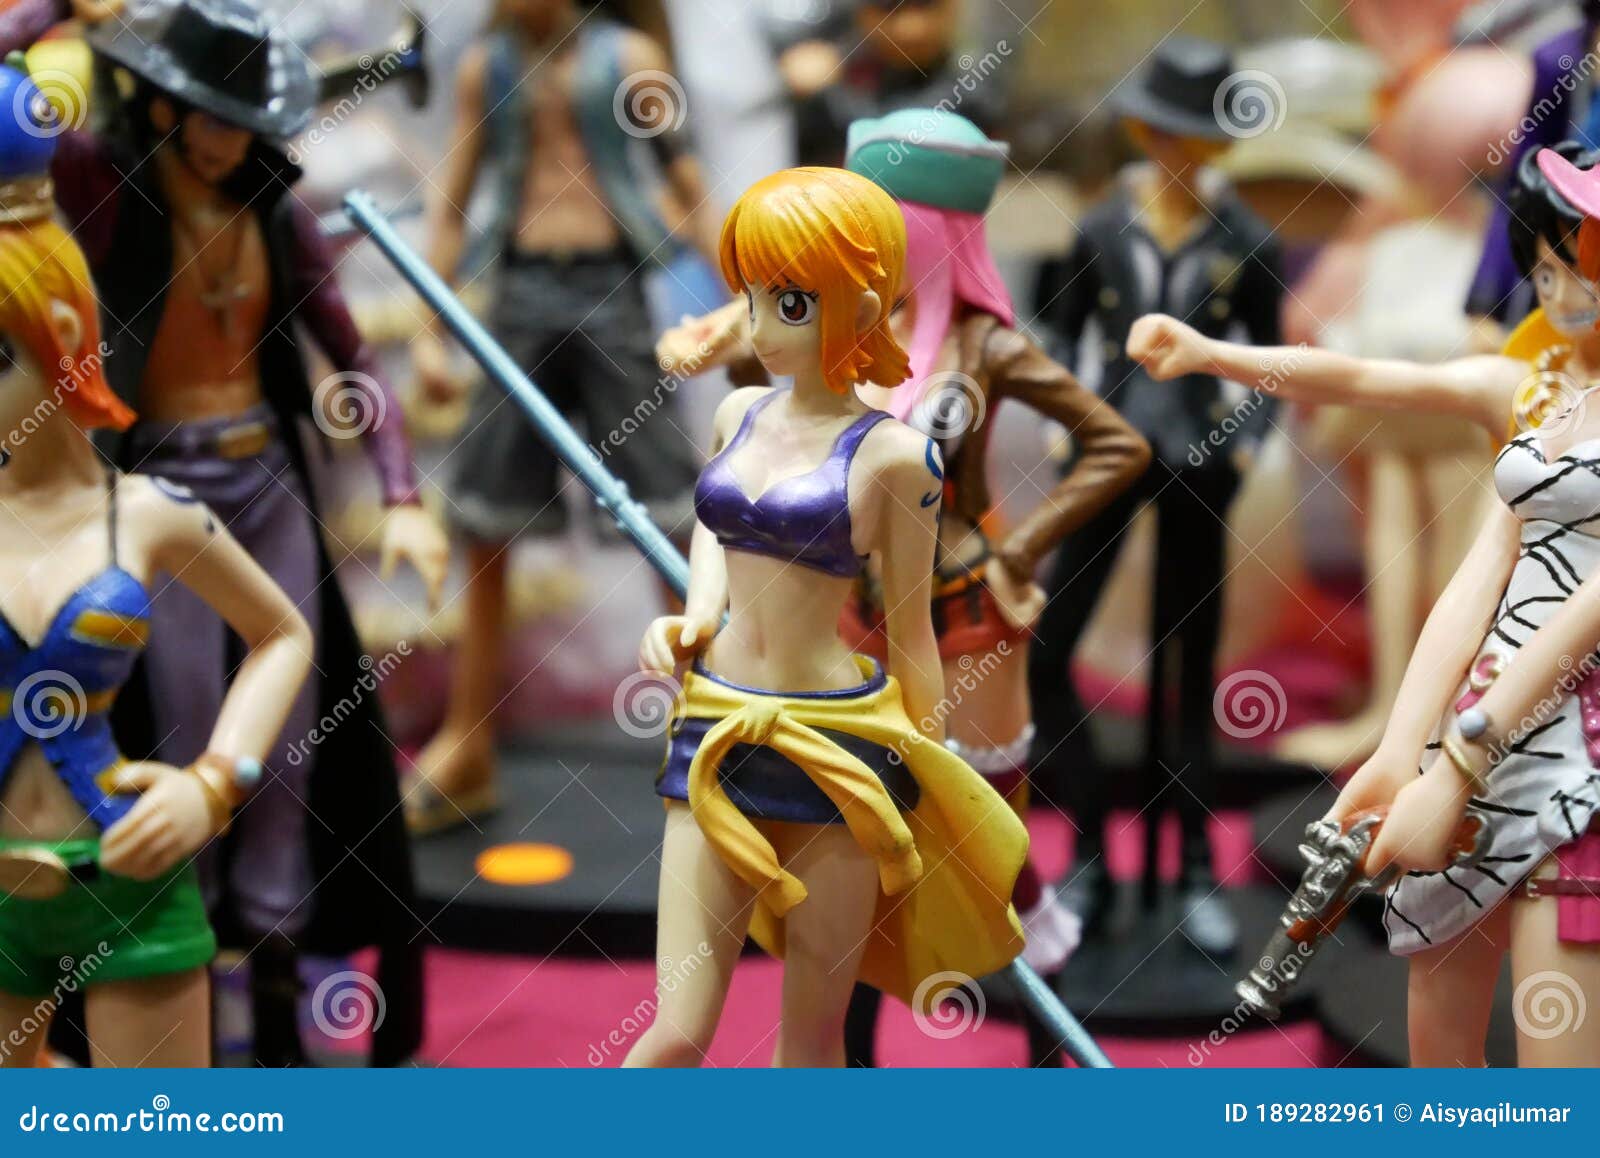 136 One Piece Anime Photos Free Royalty Free Stock Photos From Dreamstime